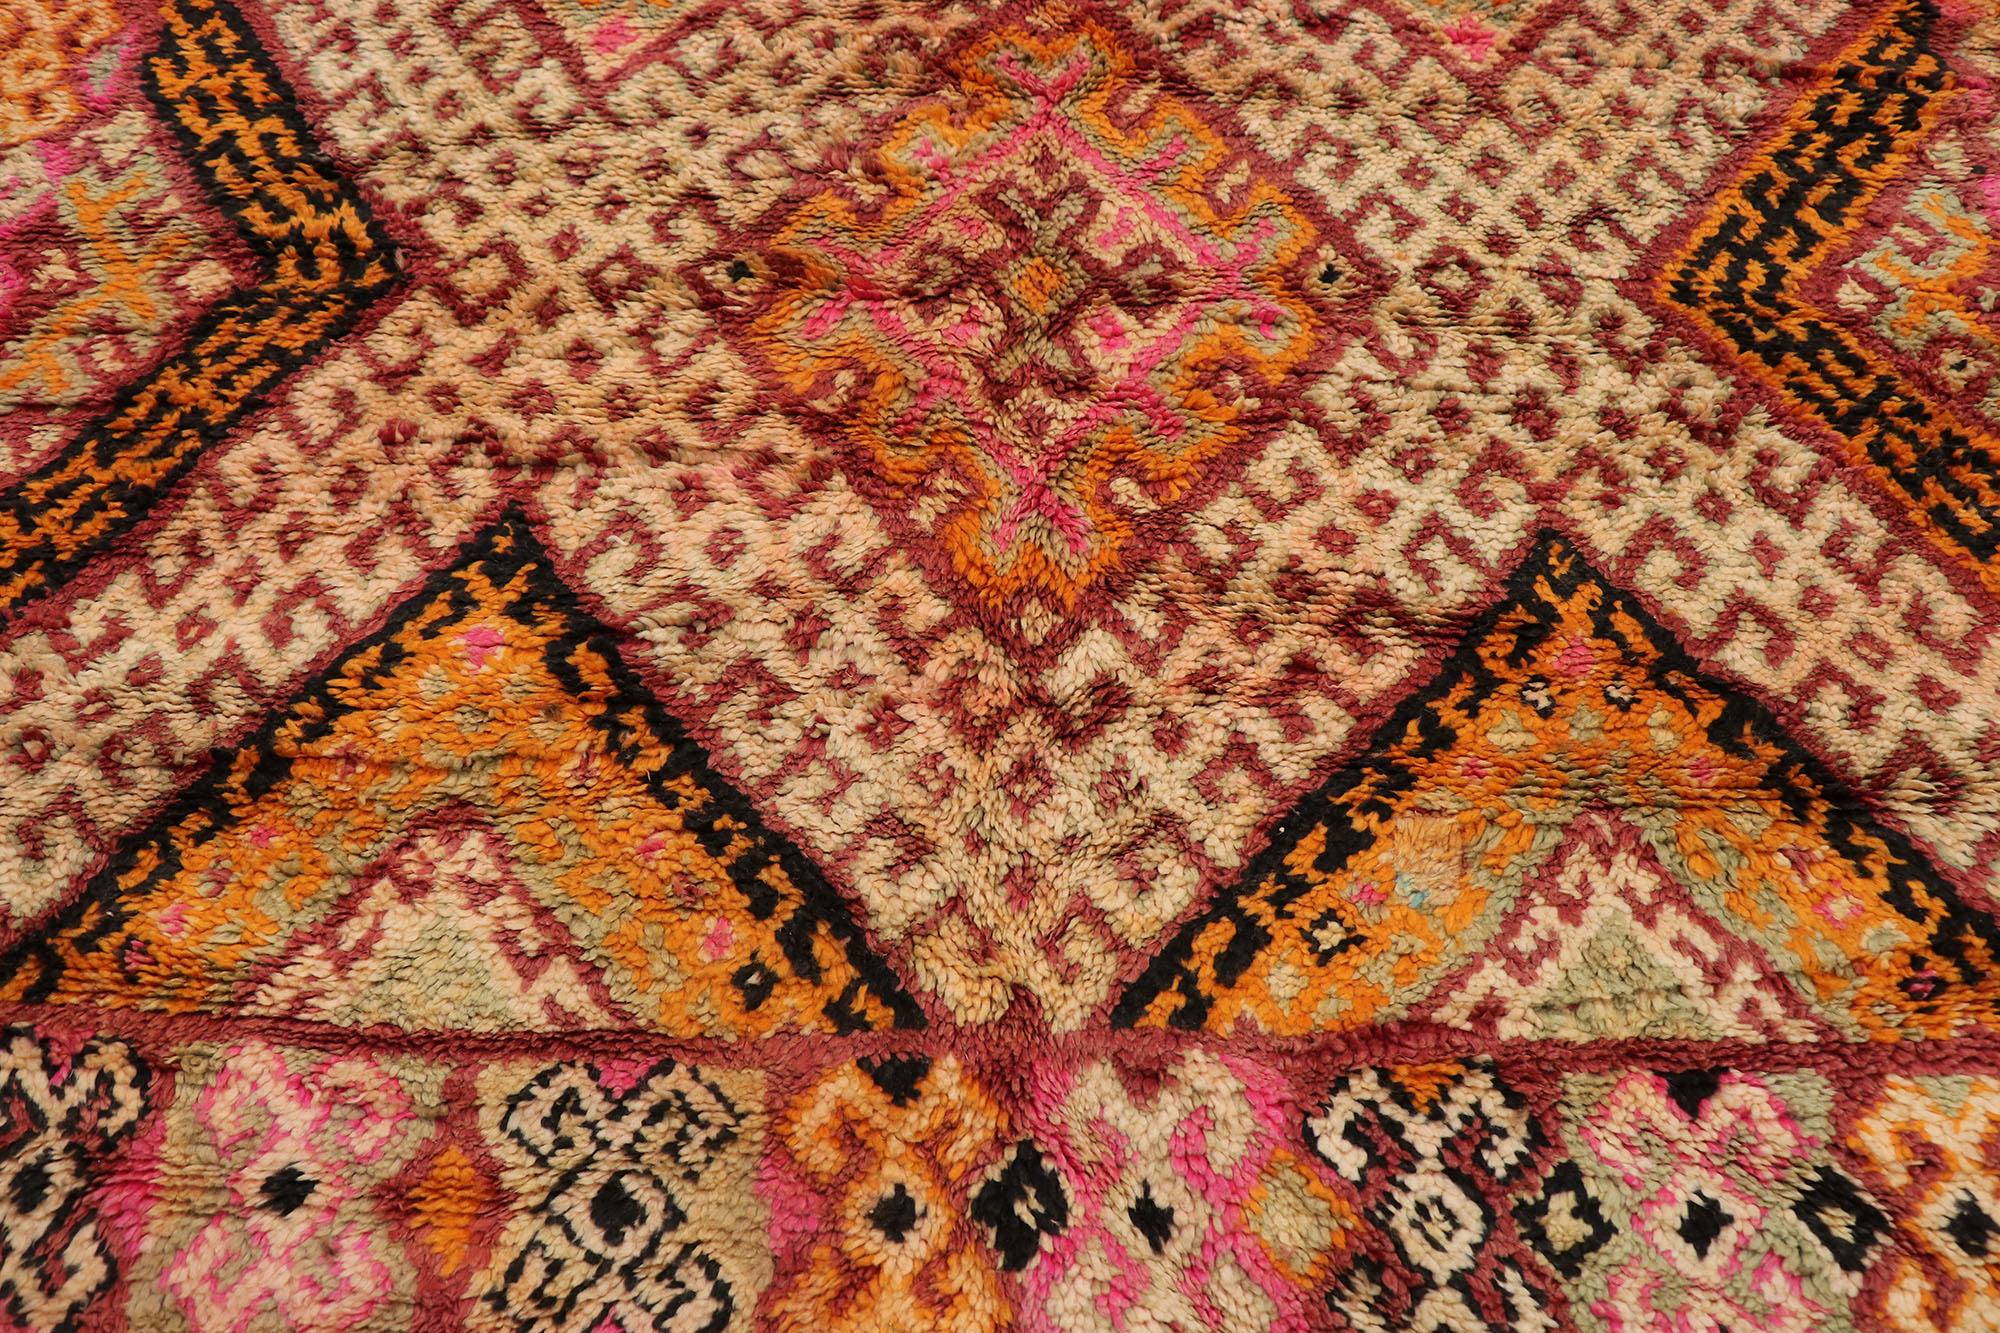 Vintage Beni MGuild Moroccan Rug, Midcentury Modern Meets Bohemian In Good Condition For Sale In Dallas, TX